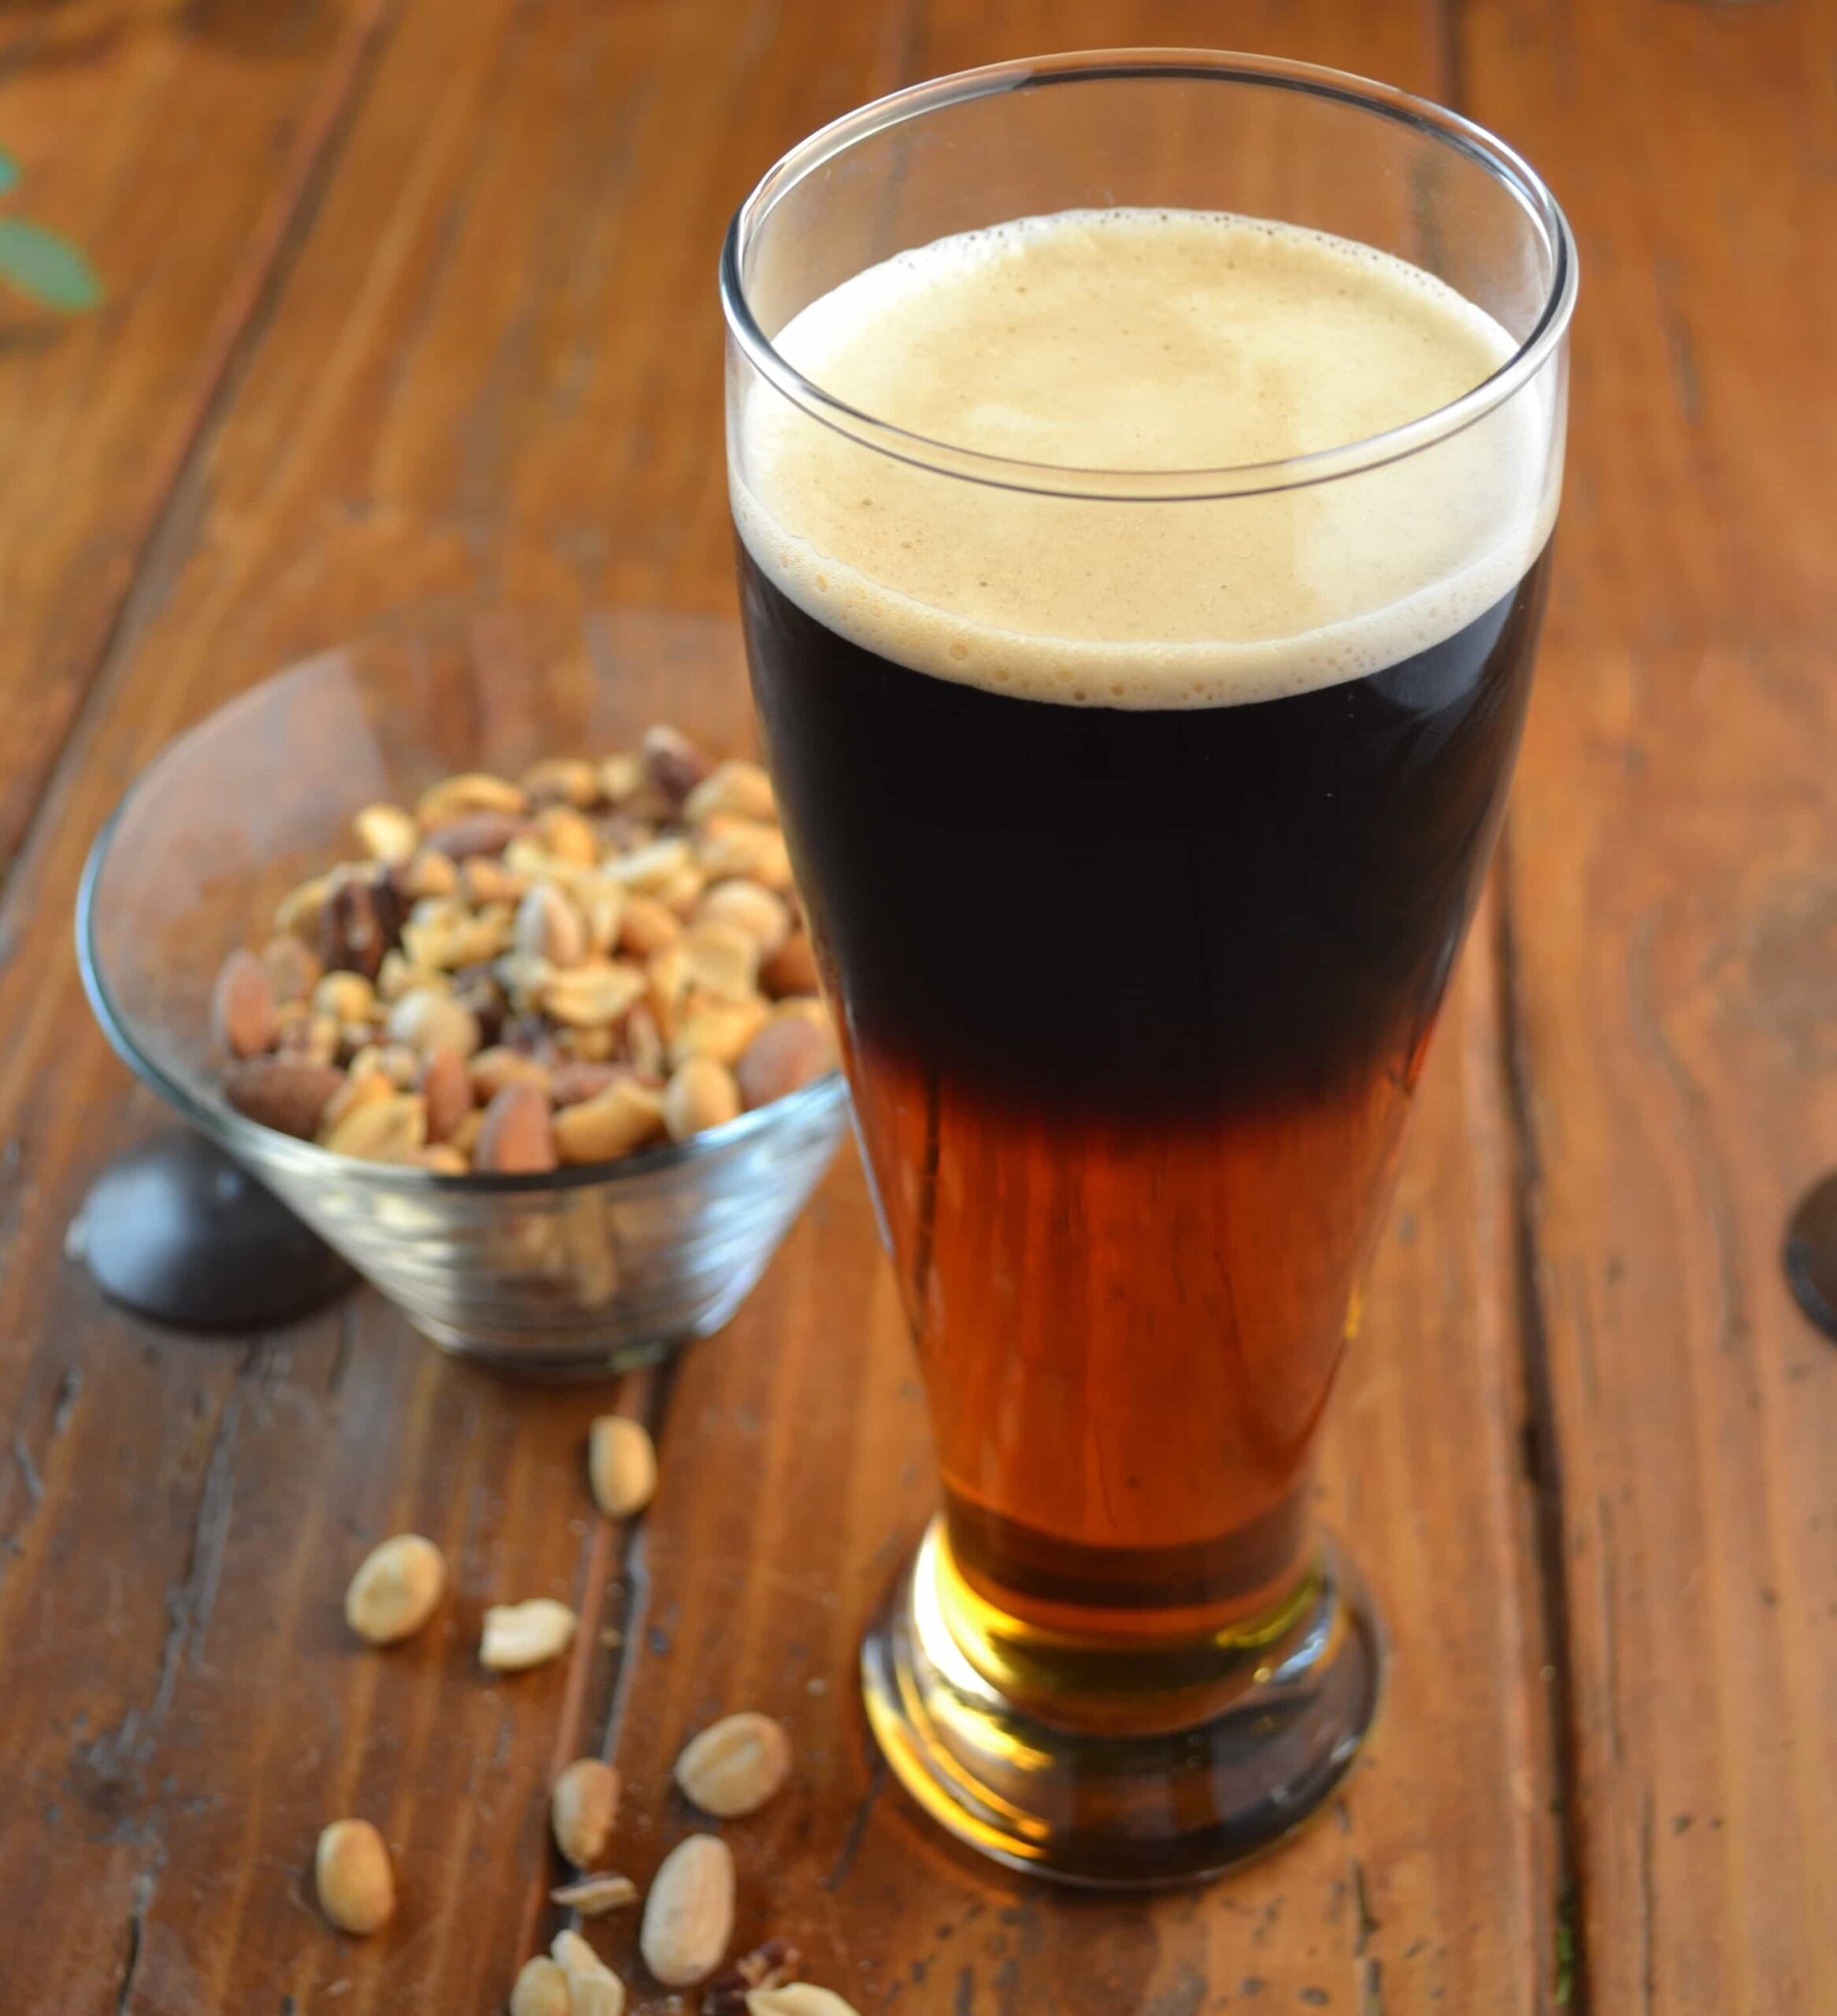 How to make a Black and Tan Beer